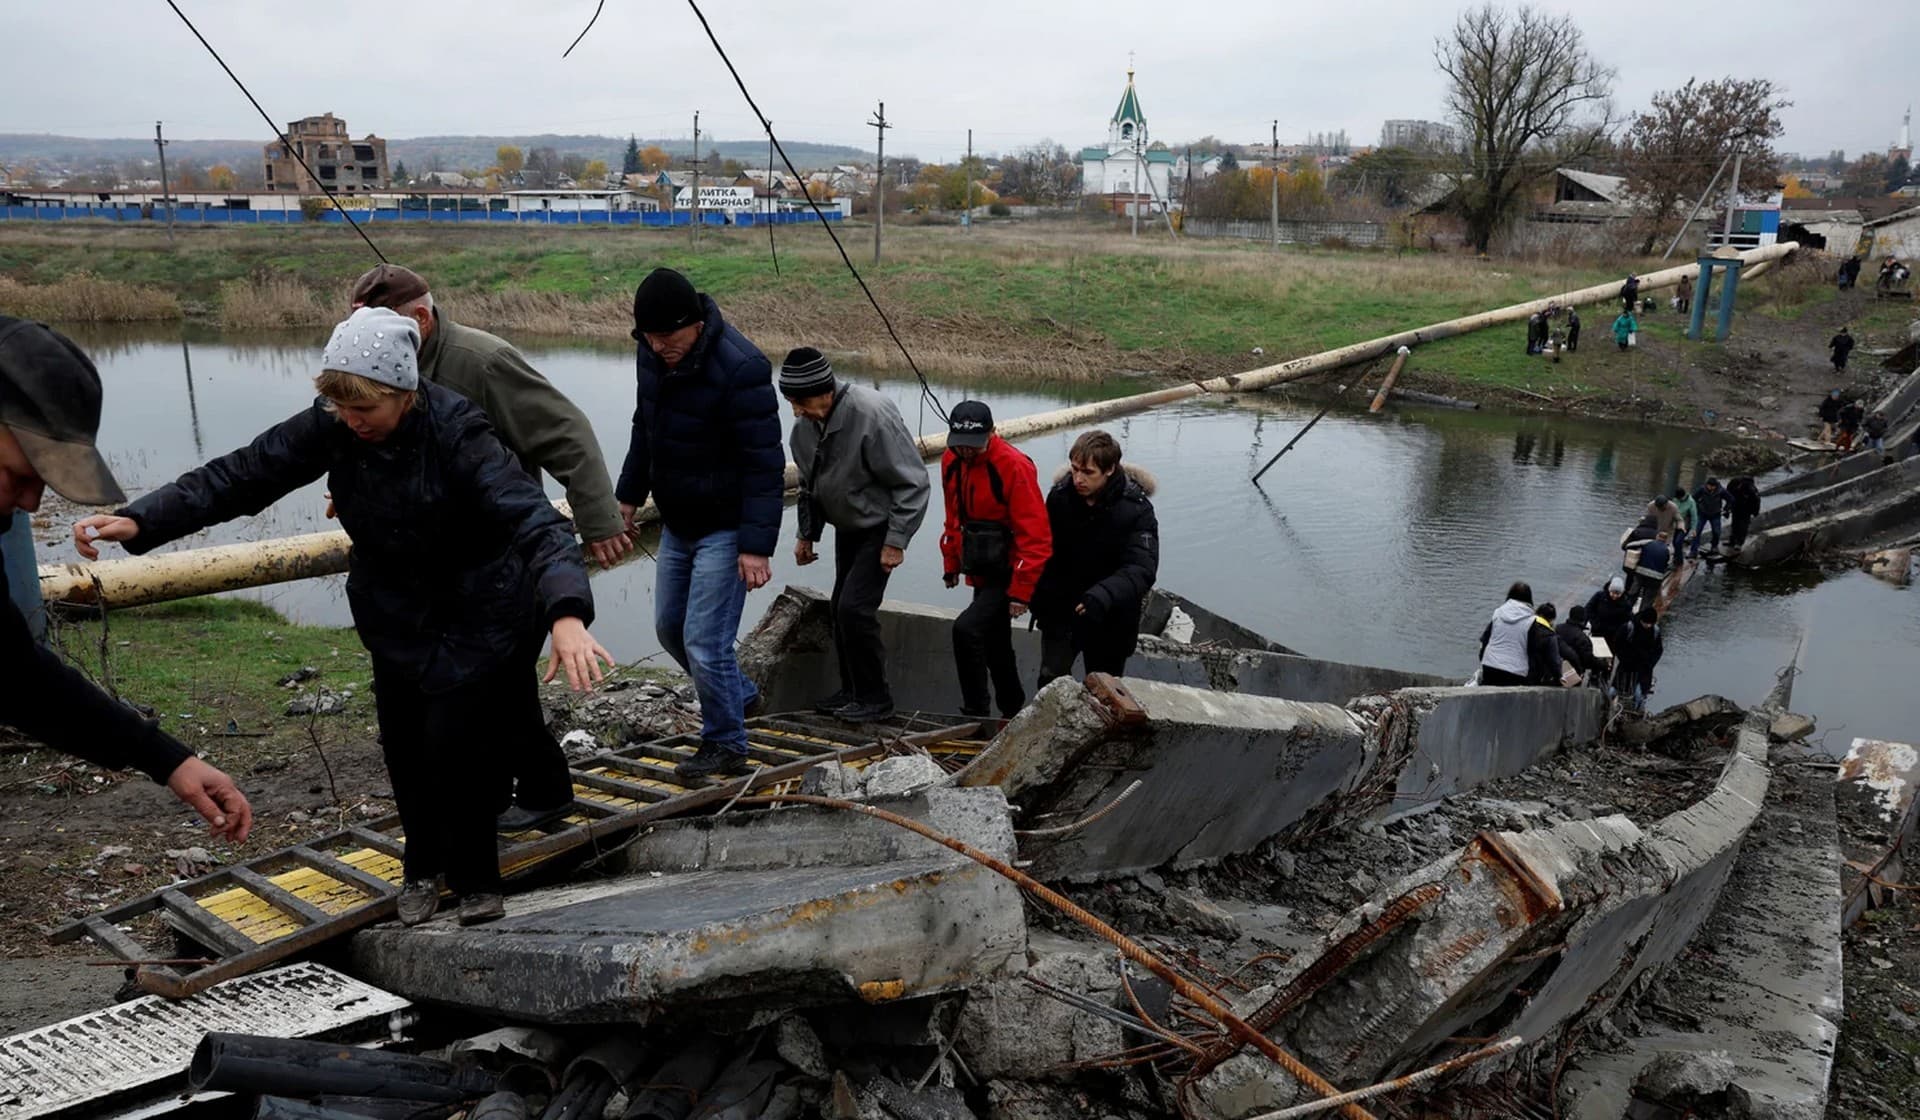 People leave and return to their shelters as they cross a destroyed bridge in Bakhmut